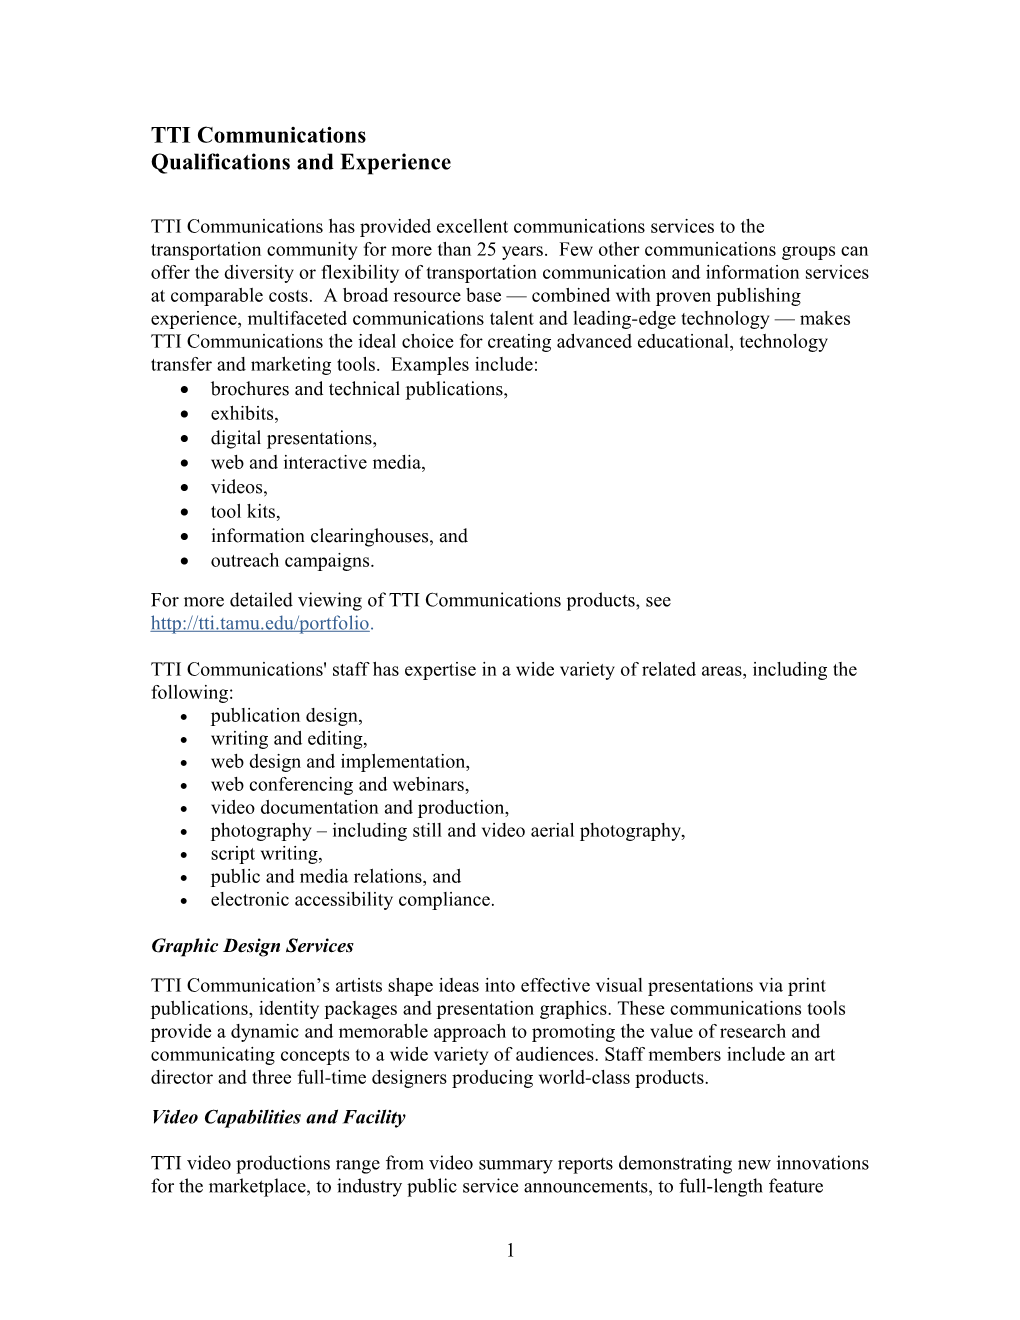 Qualifications and Experience